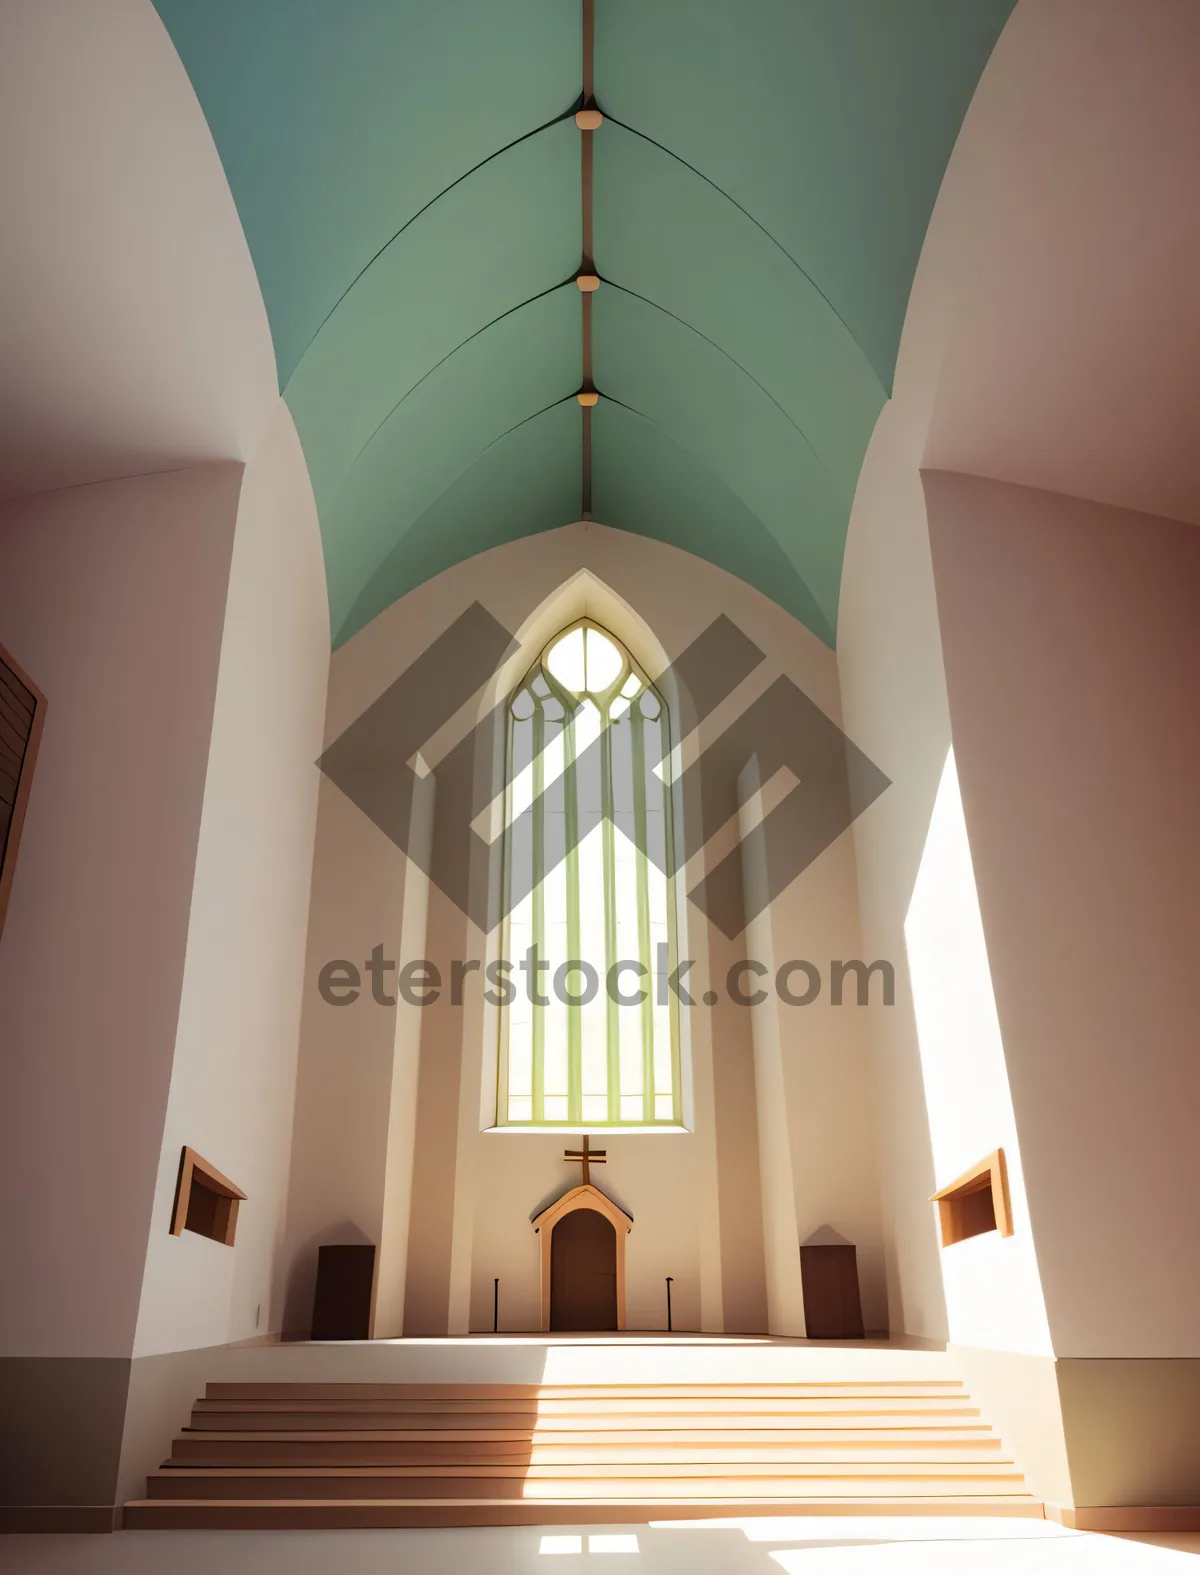 Picture of Grandeur of Sacred Stone: Historic Cathedral Interior